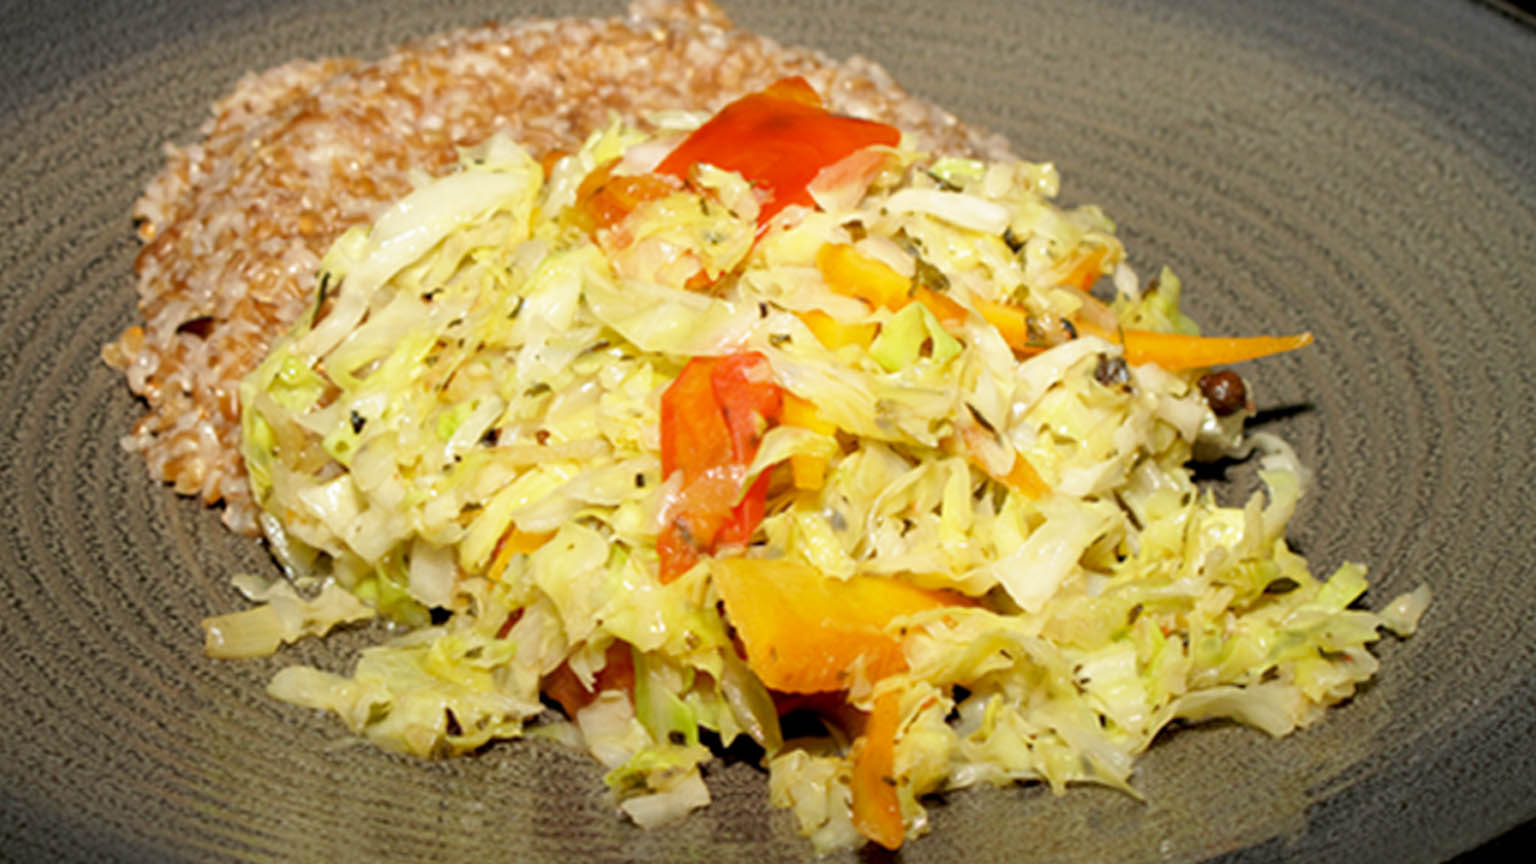 https://jamaicandinners.com/wp-content/uploads/2021/10/Steamed-Cabbage-and-Carrot-Rastafarian-Vegetarian-Cooked-Food-Recipe-MiQuel-M-Samuels-1.jpg